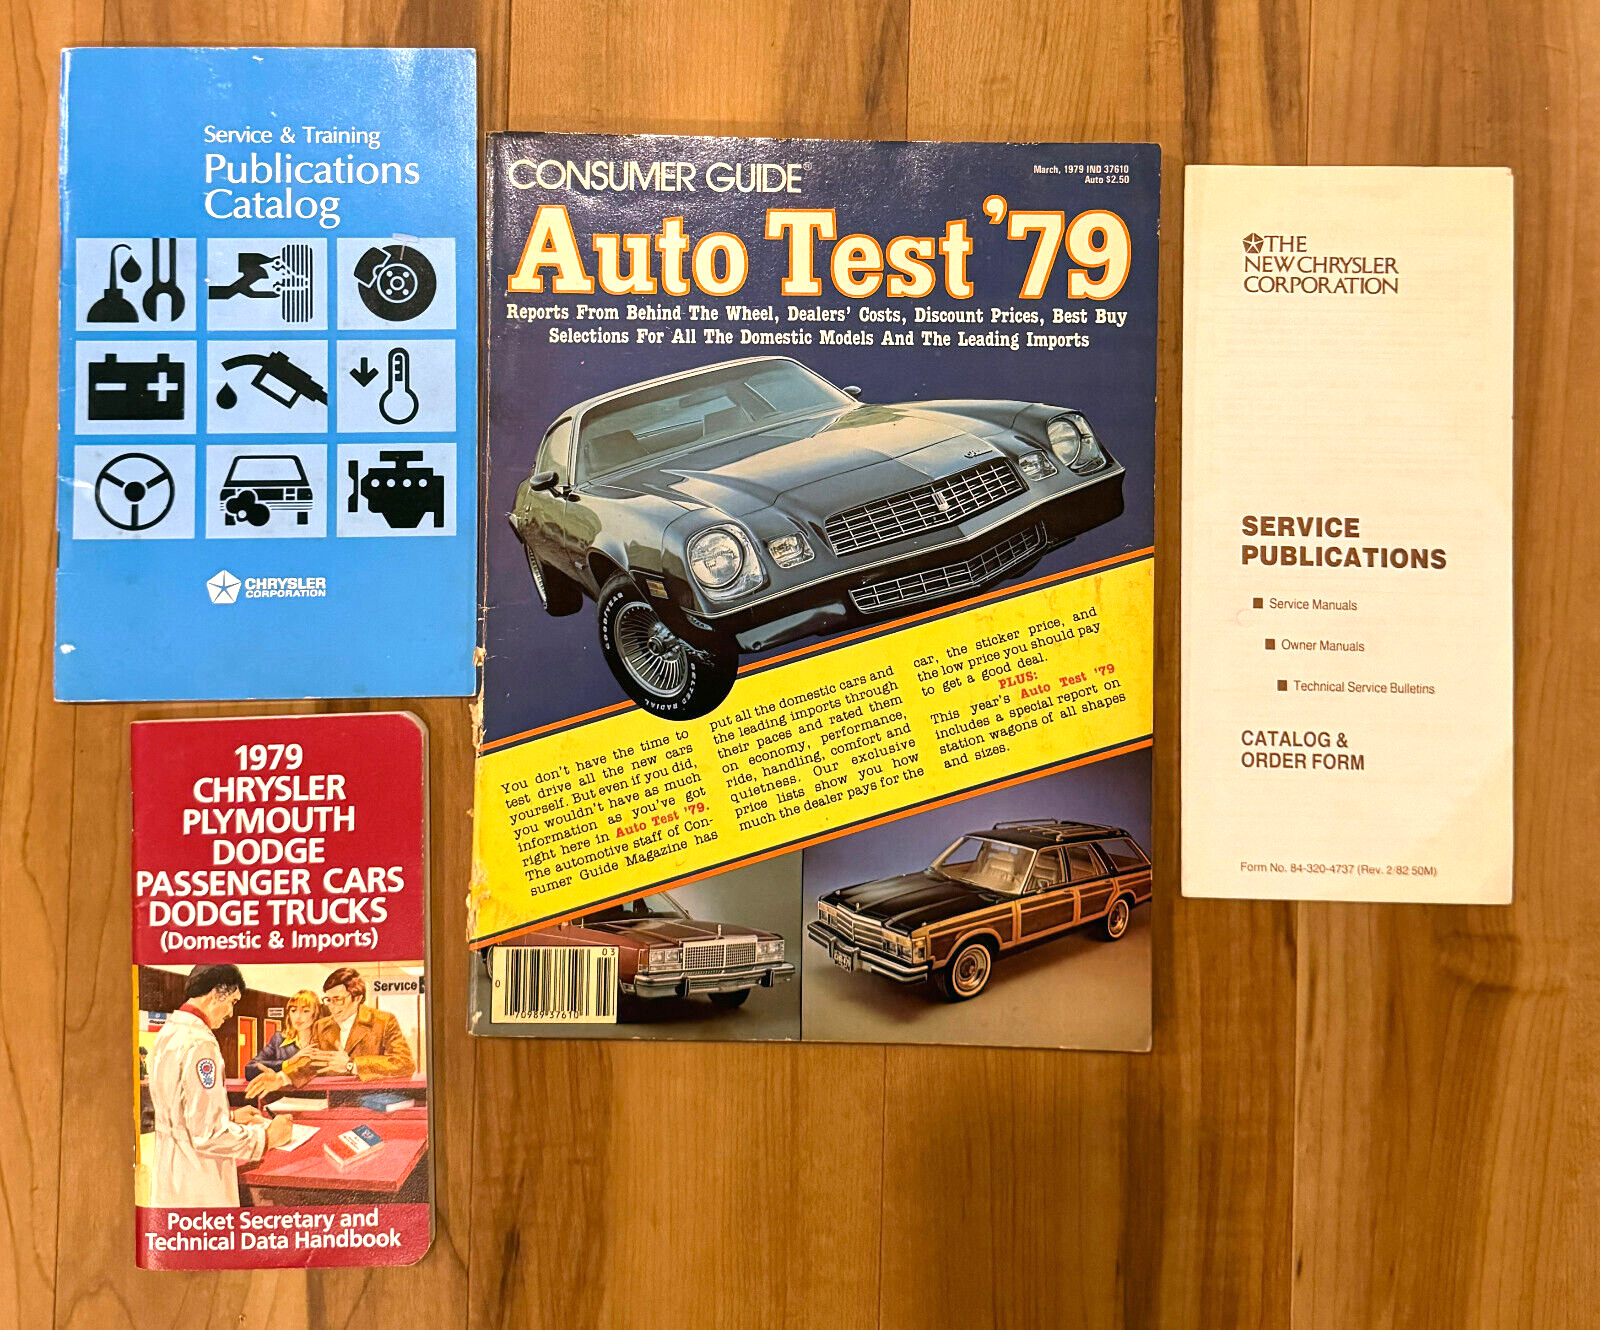 Consumer Reports Auto Test \'79, 1979 Chrysler Technical Data Handbook + 2 Others